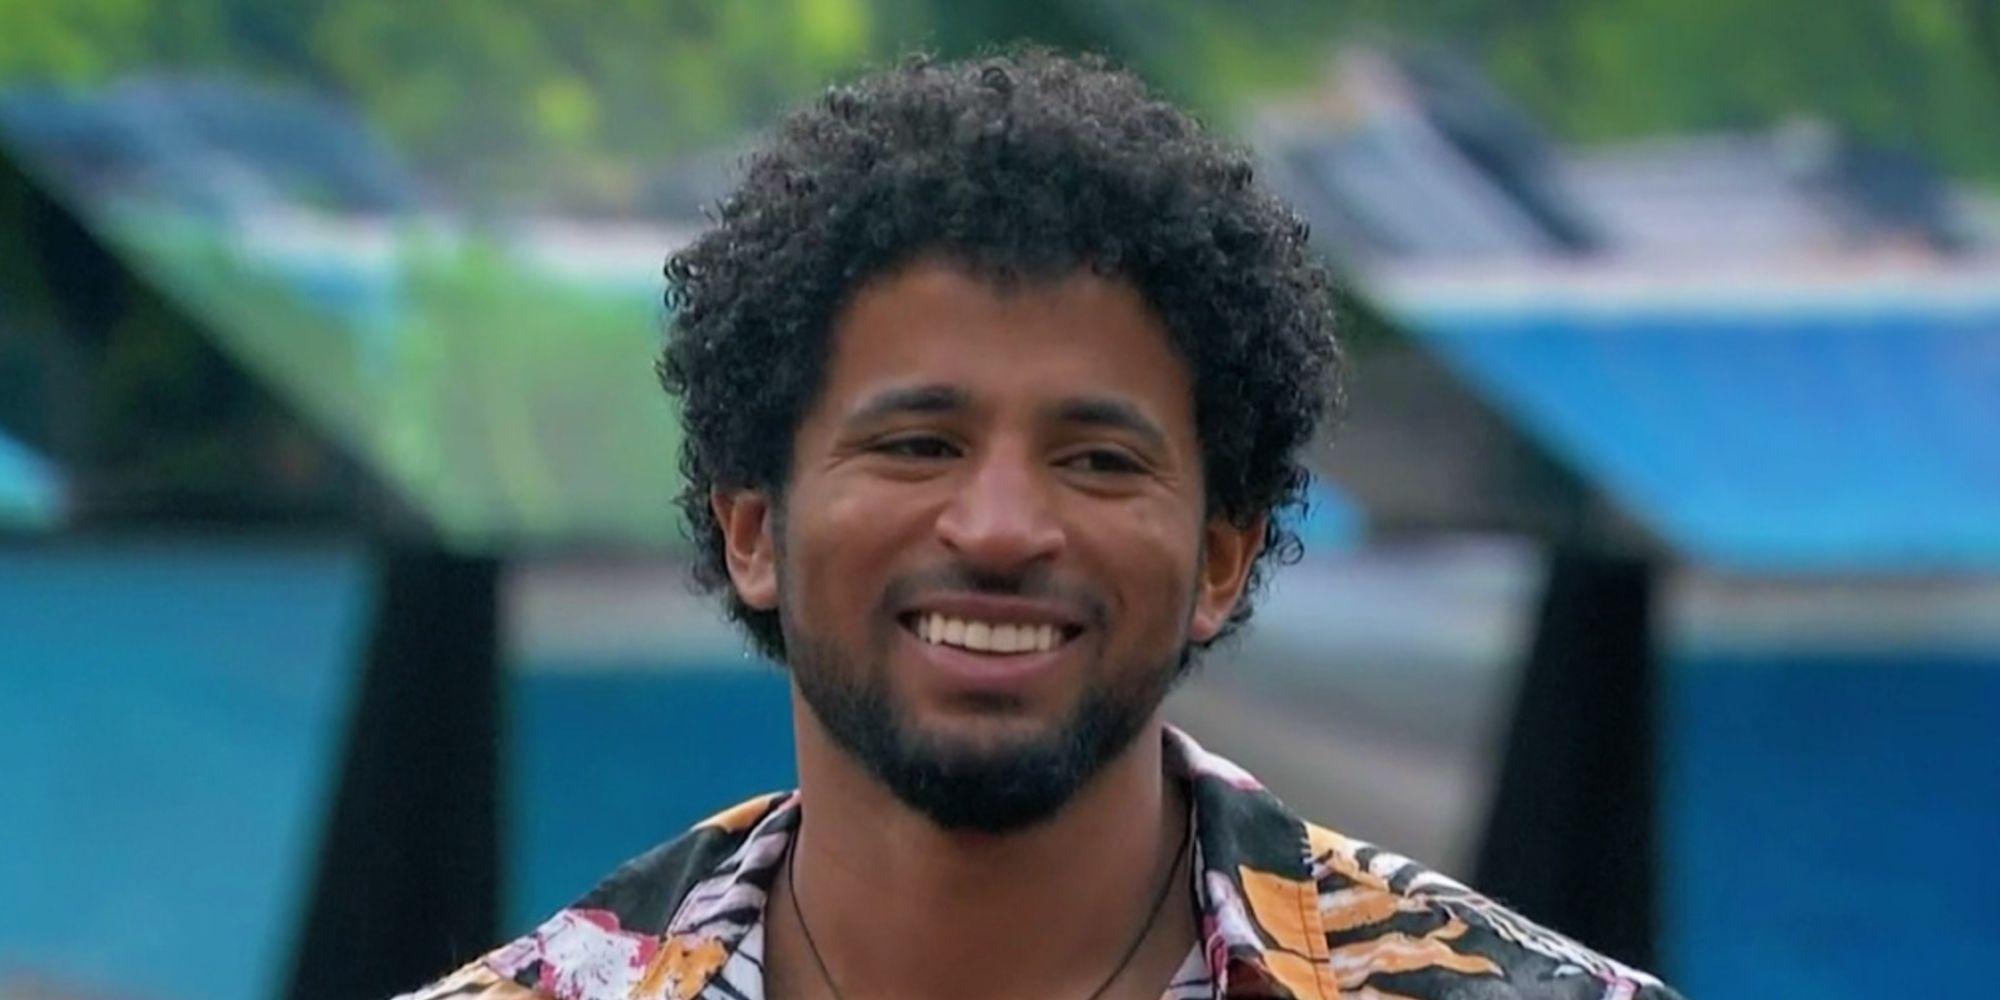 Kyland Young in Big Brother 23's backyard